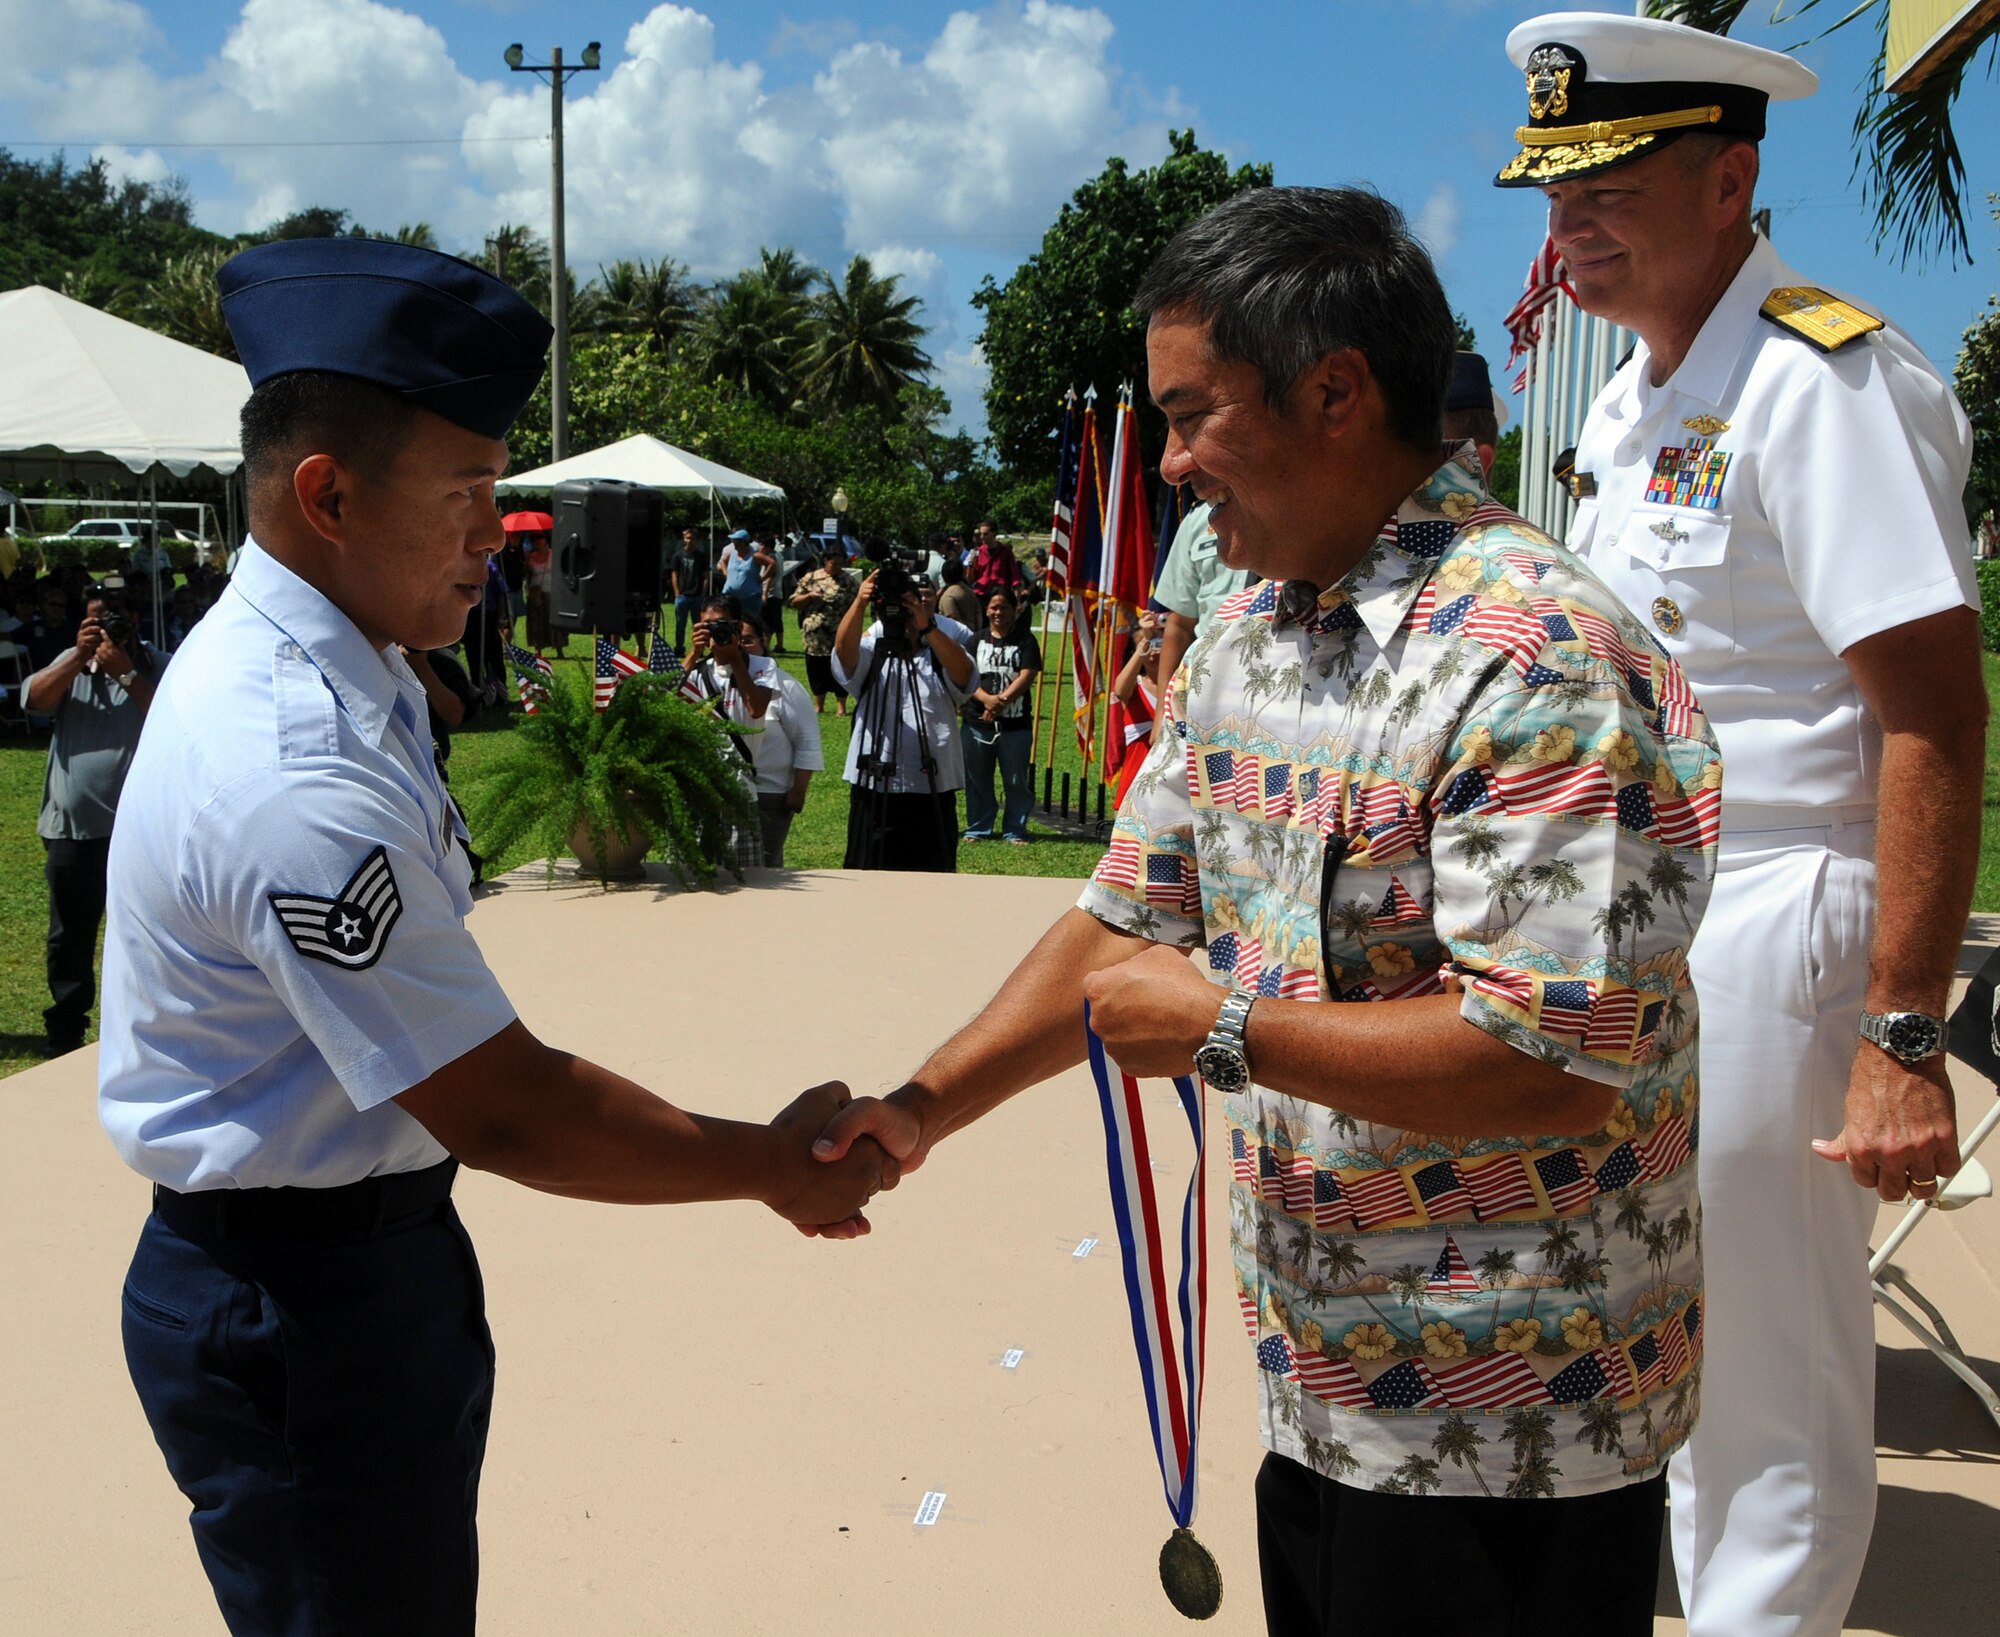 ANDERSEN AIR FORCE BASE, Guam - Staff Sgt. Francis Tagalog, 36th Civil Engineer Fire and Emergency Services Flight, shook hands with Gov. Felix Camacho as he accepts his Airman of the Year medal during the the Veterans Day Ceremony at the Ricardo J. Bordallo Governors Complex in Adelup, Guam Nov. 11. Each branch was represented by a top performer during the ceremony. (U.S. Air Force photo by Airman 1st Class Courtney Witt)